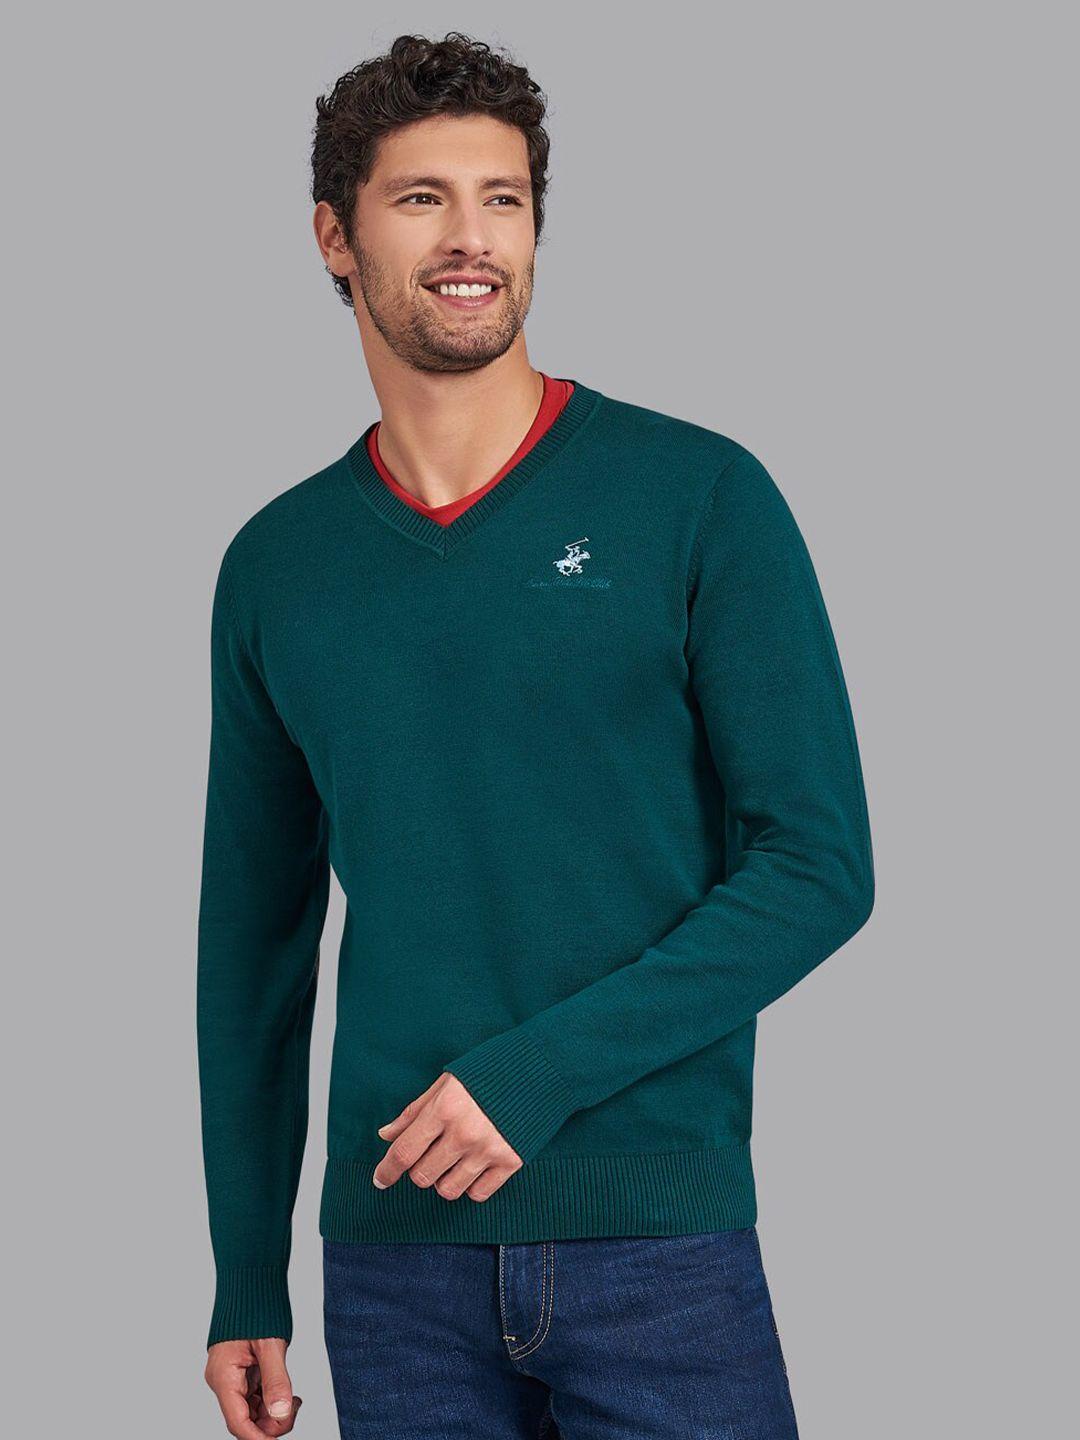 beverly-hills-polo-club-men-green-cotton-pullover